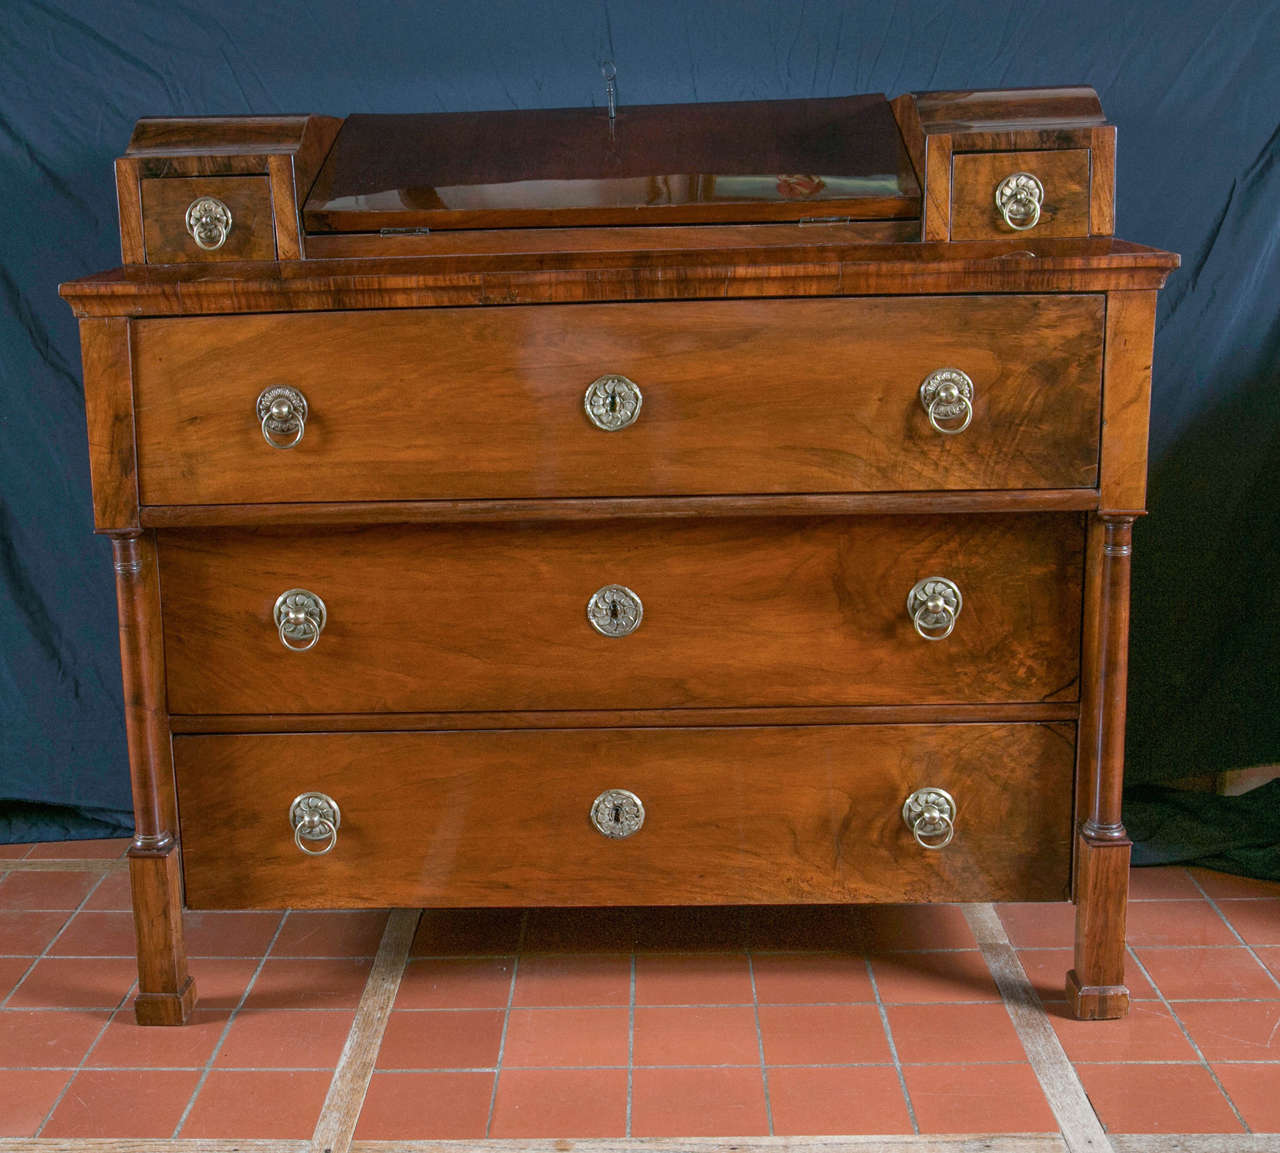 The handsome lines of this chest augment its wonderful proportions with drawers flanking the center drop down writing surface. Deeper than the two below, the top drawer is supported by finely turned columns that terminate in square plinths. Brass